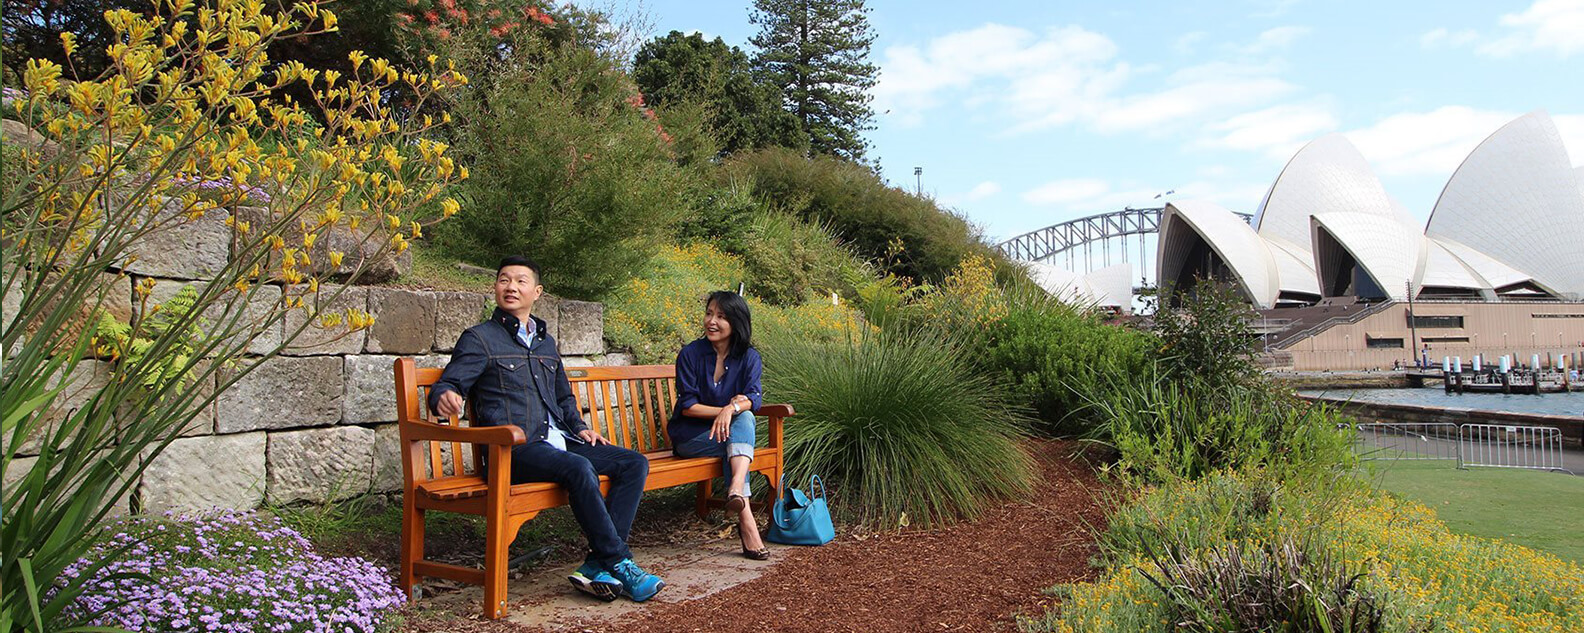 two people sit on a bench with sydney opera house in background